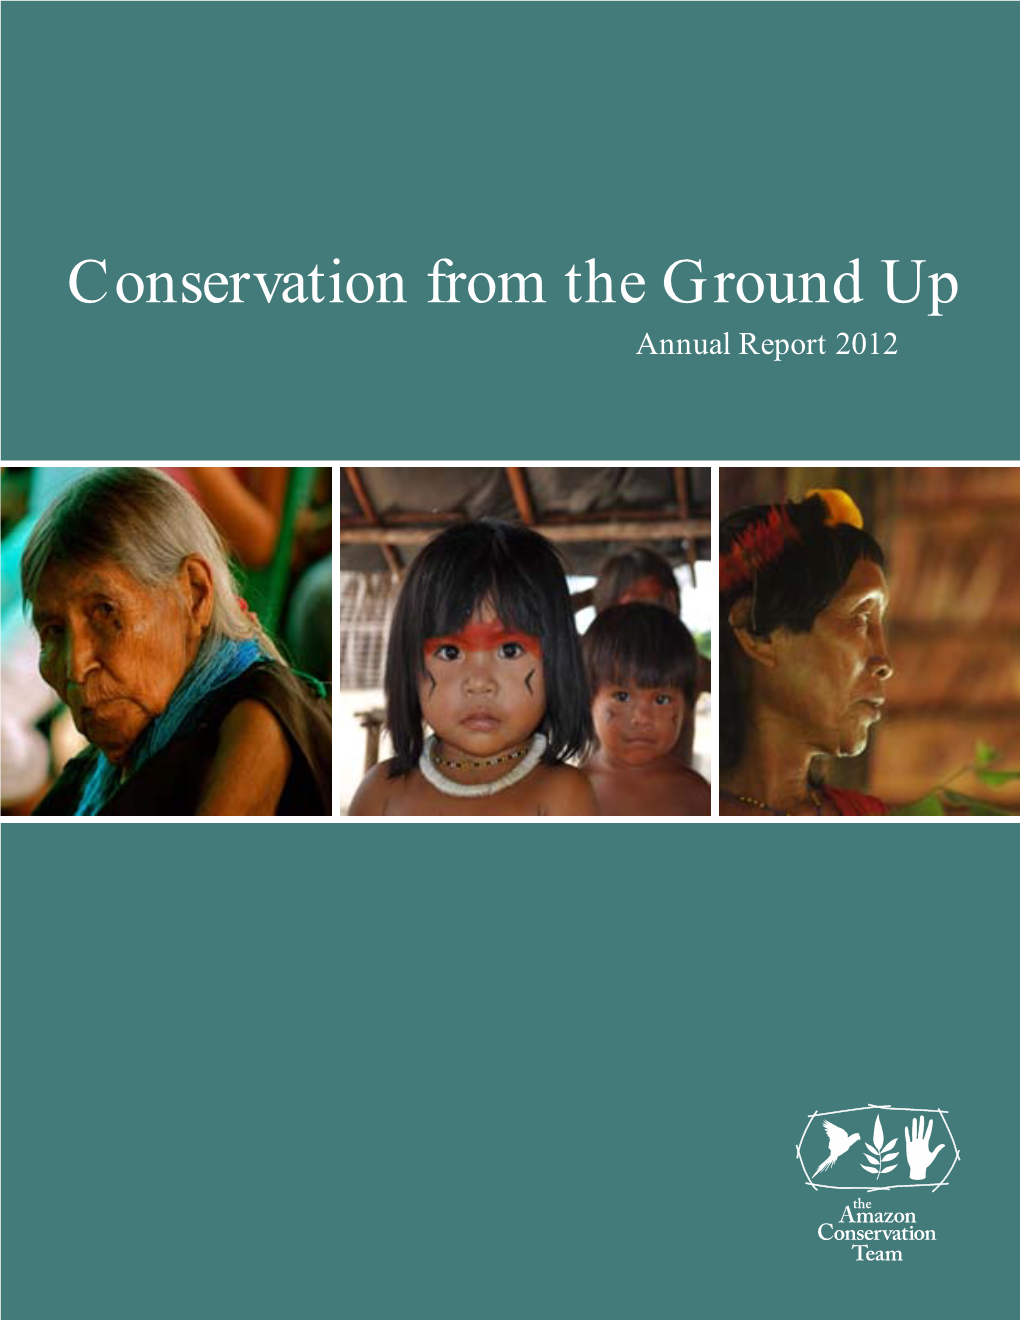 Conservation from the Ground up Annual Report 2012 for Over 17 Years, the Amazon Conservation Team Has Partnered with Indigenous People to Protect the Rainforest